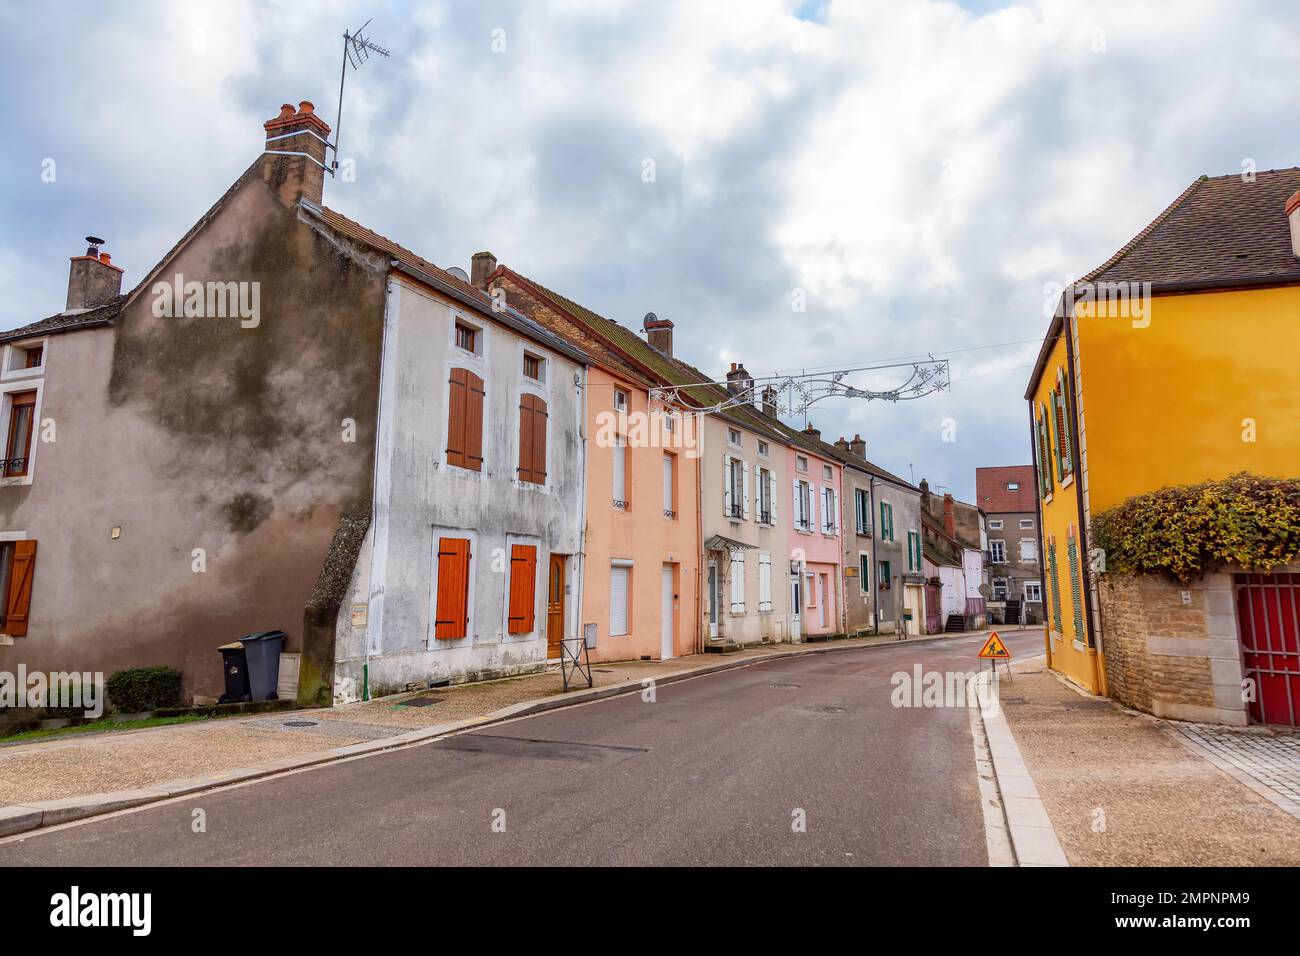 Streets in a small touristic town during cloudy fall season evening. Stock Photo